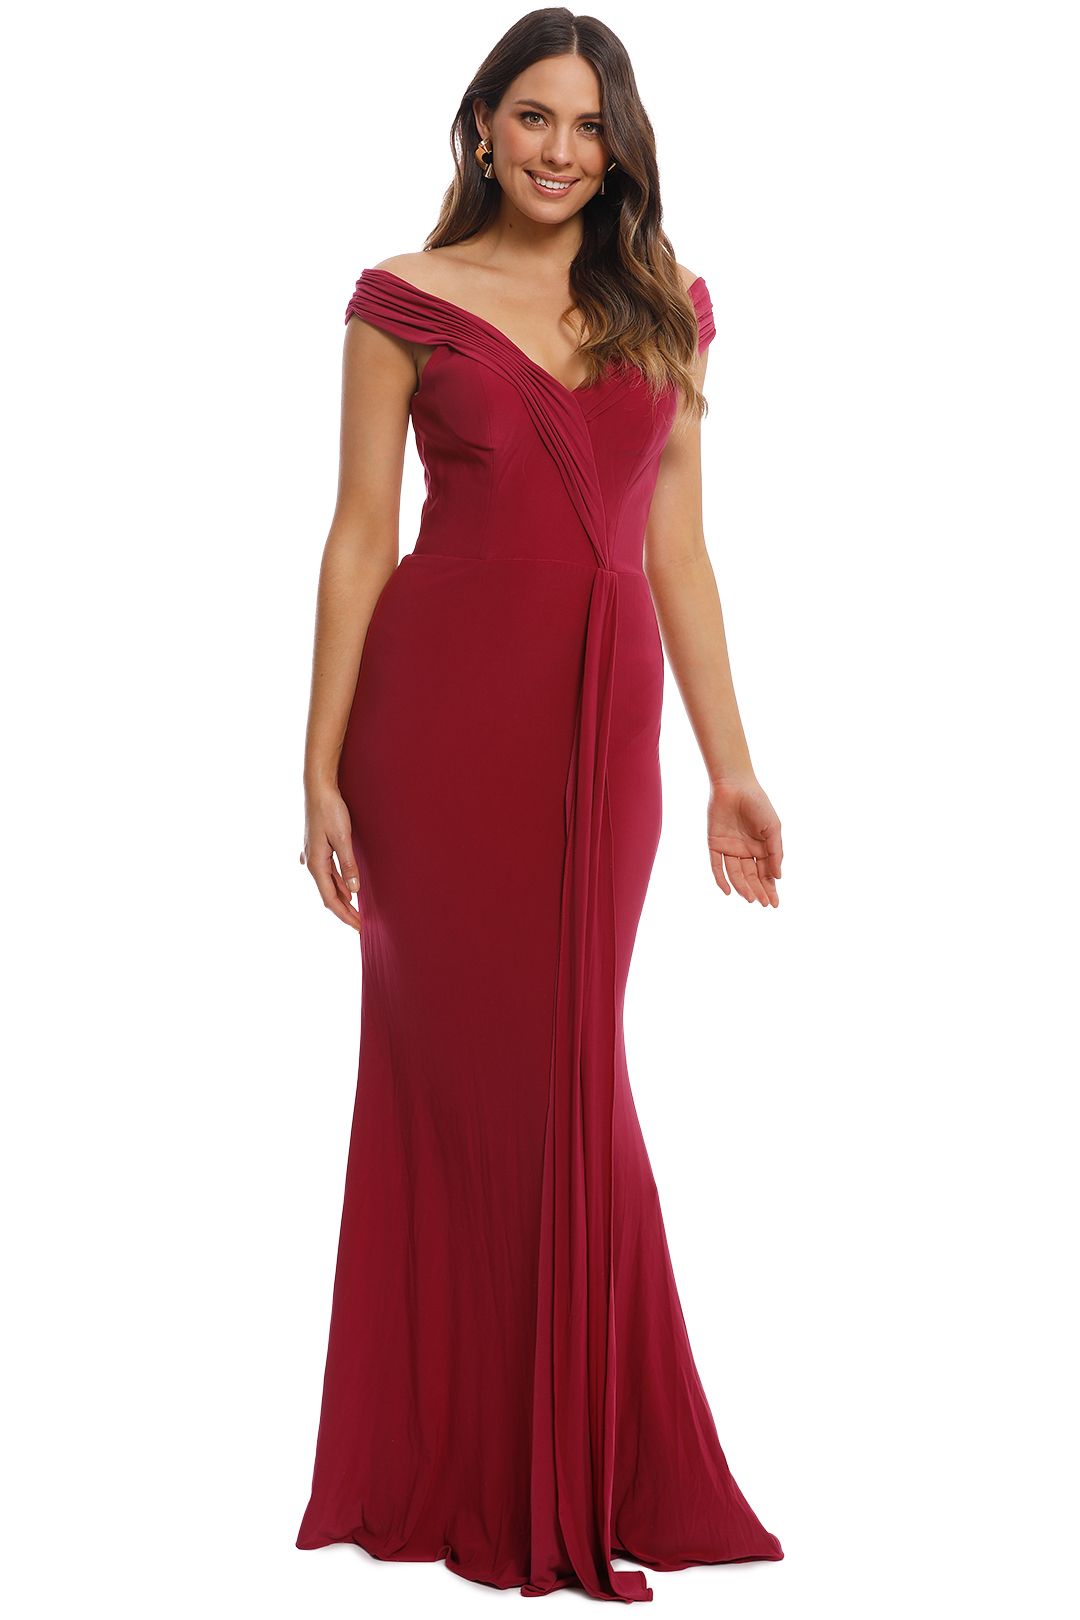 Malissa Gown in Berry by Tania Olsen for Hire | GlamCorner